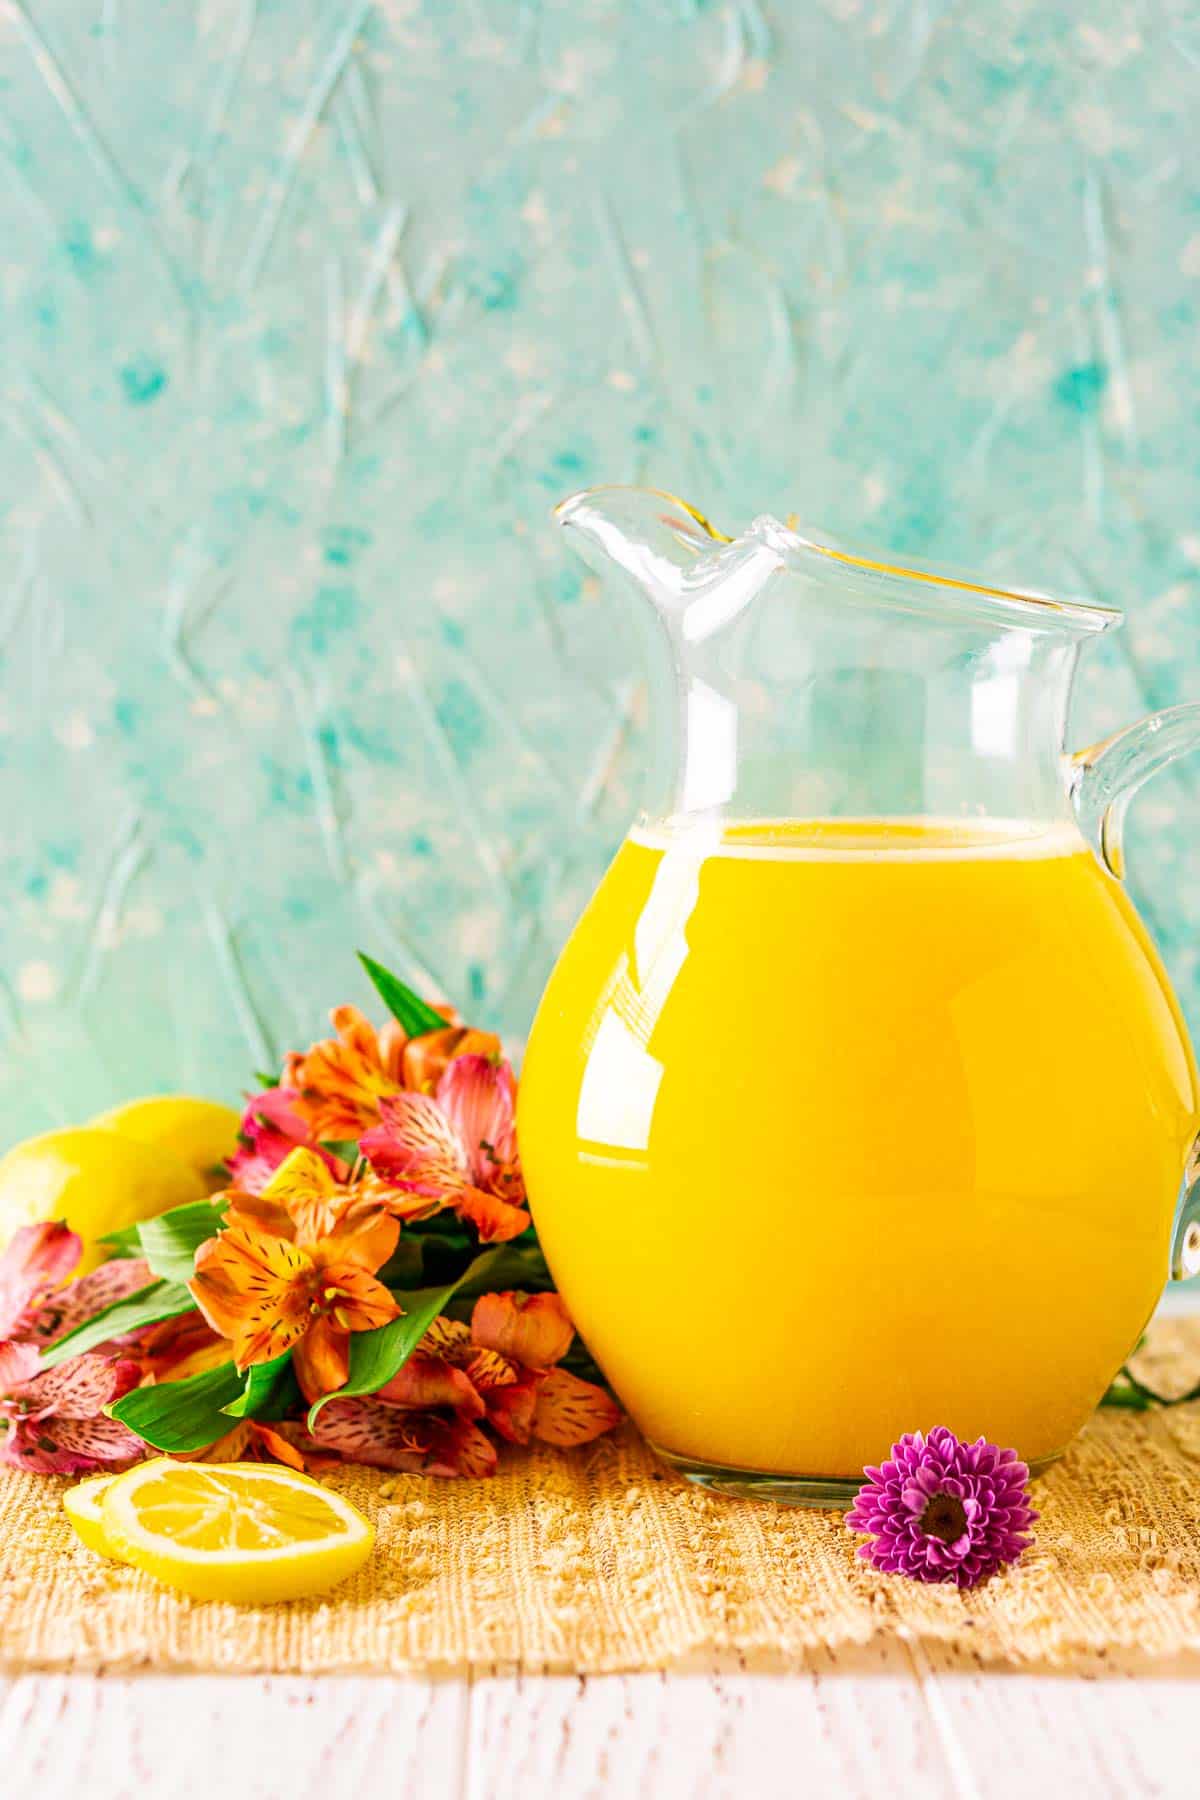 A glass pitcher filled with the mango lemonade against a blue background on a straw placemat with tropical flowers around it.